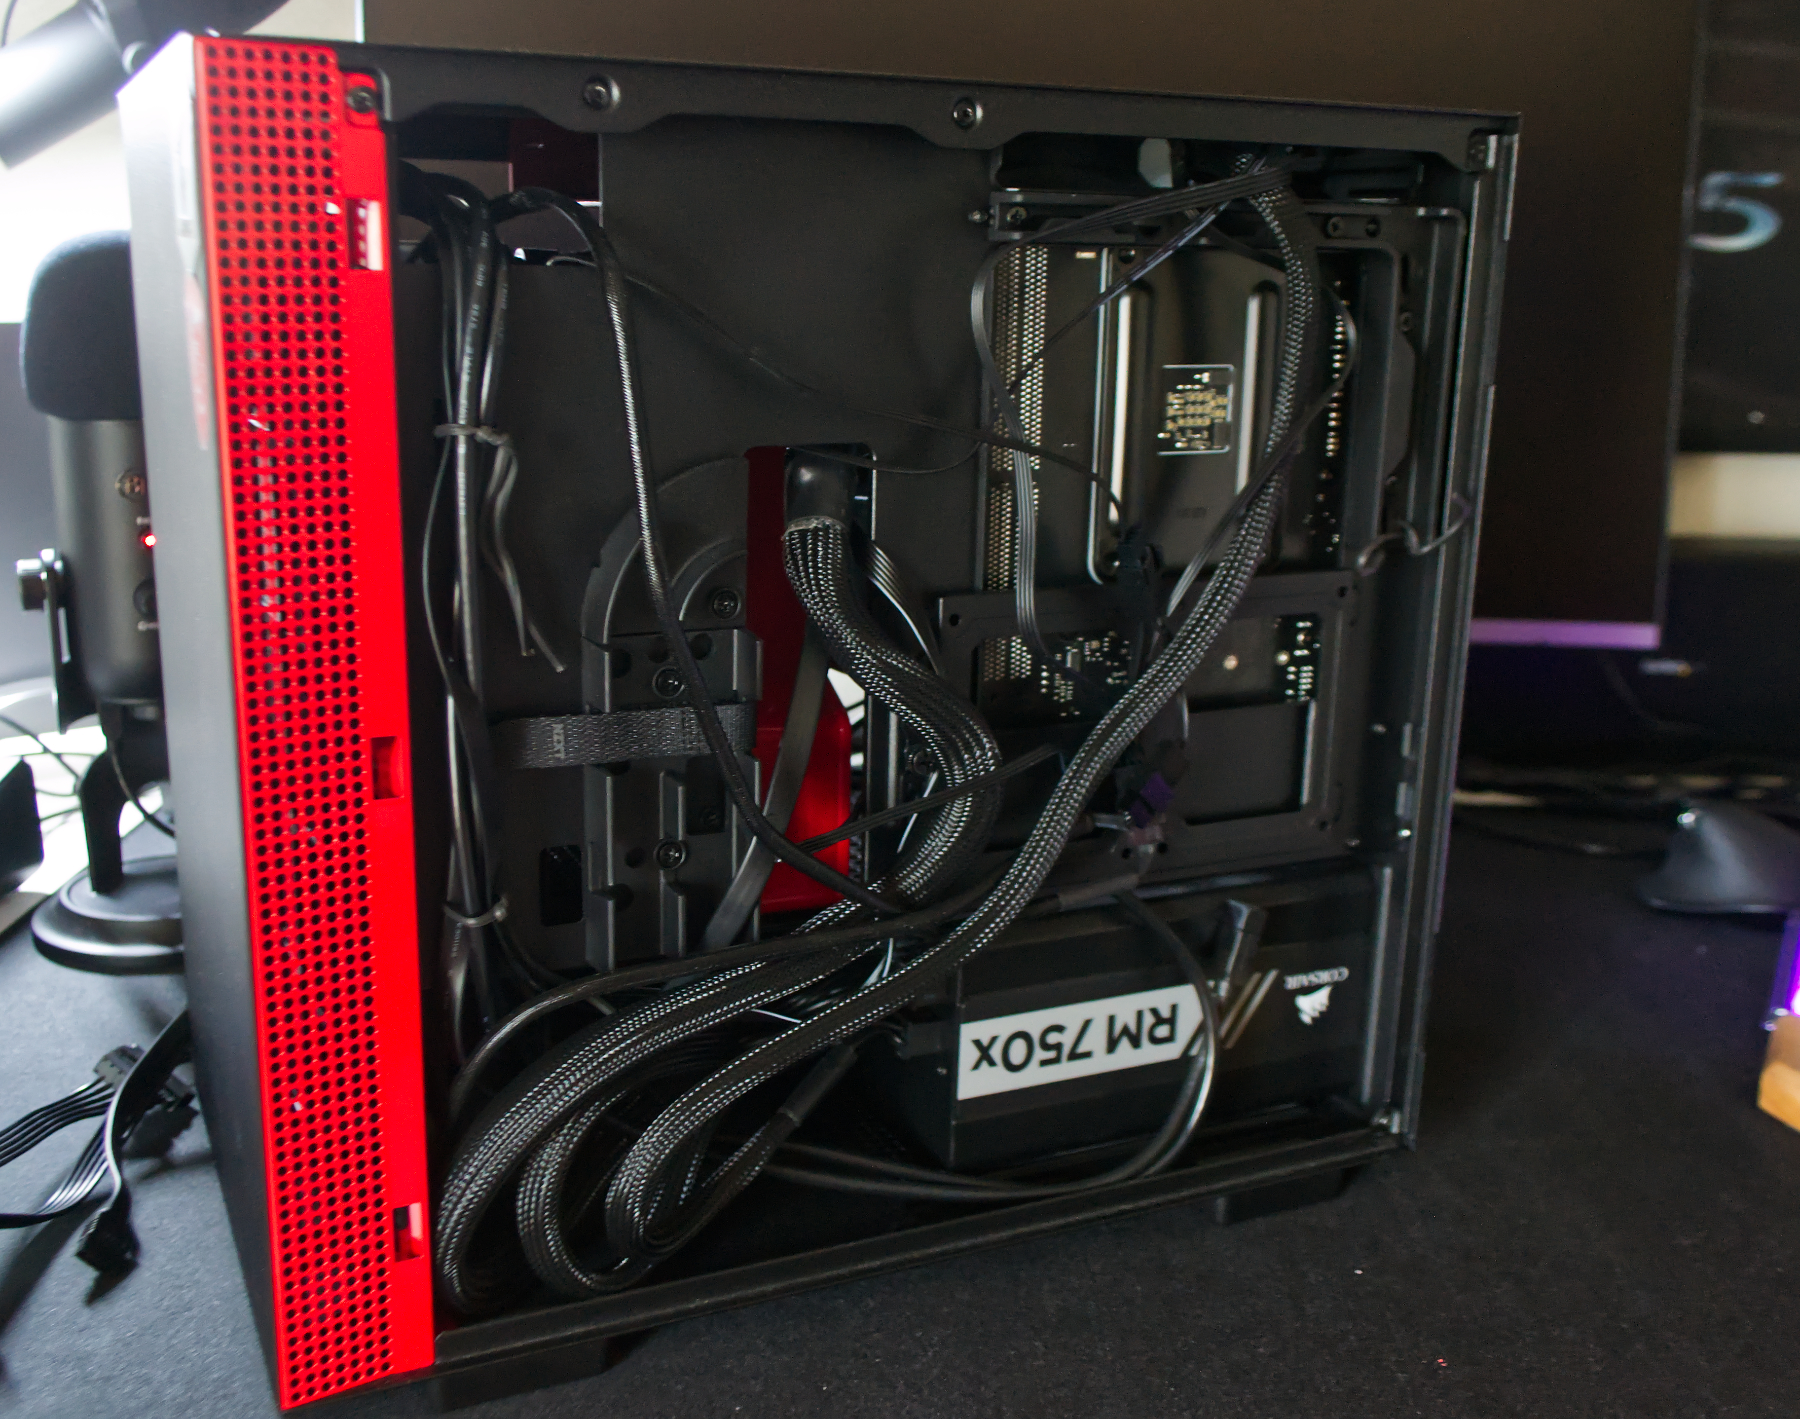 Backpanel of the mini-ITX case